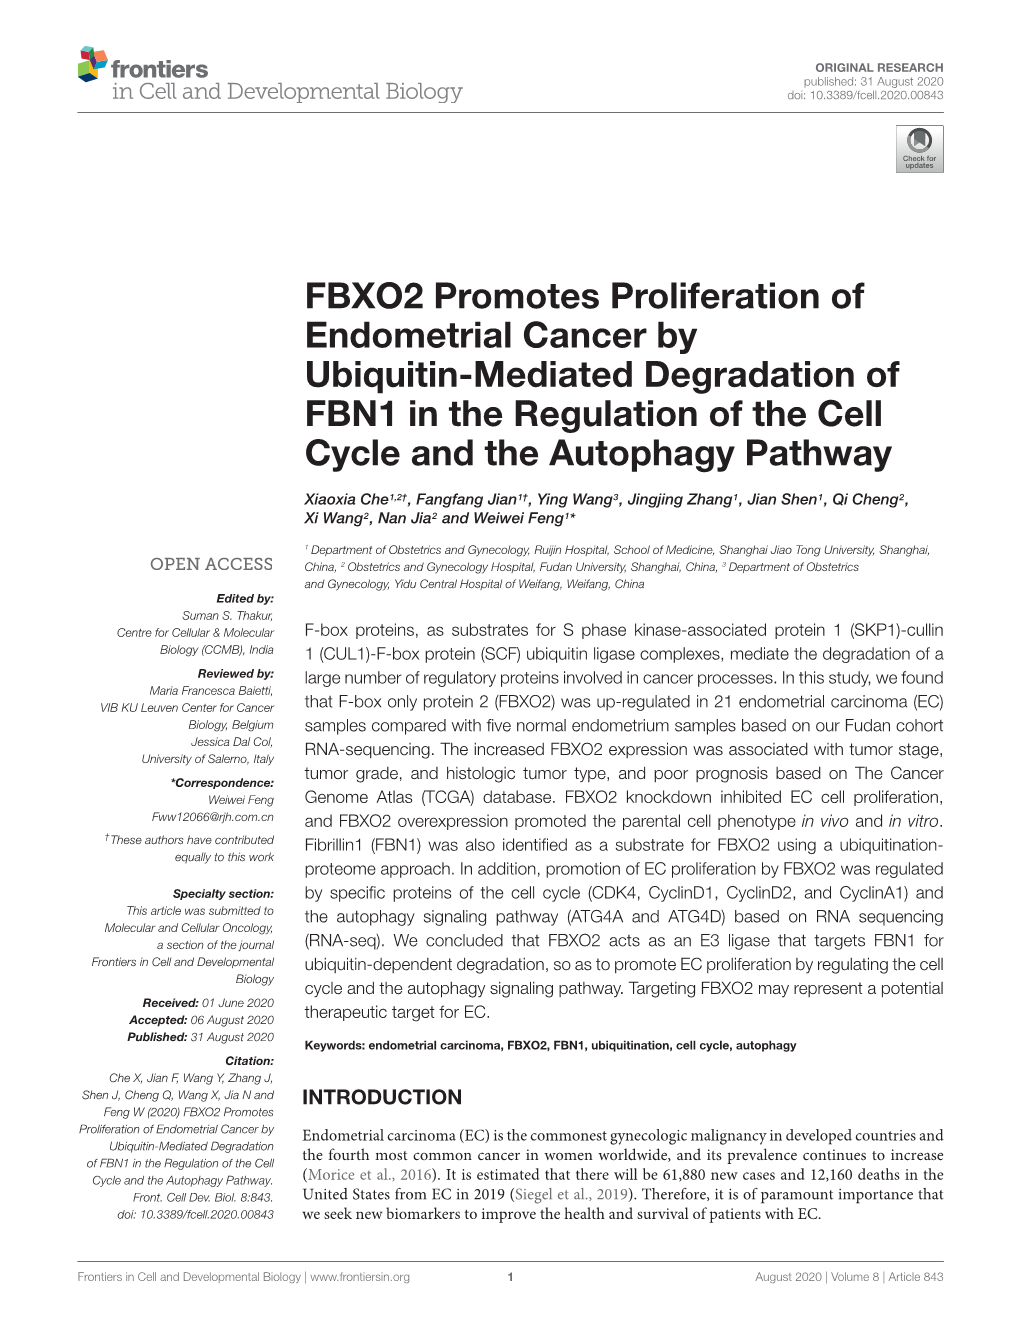 FBXO2 Promotes Proliferation of Endometrial Cancer by Ubiquitin-Mediated Degradation of FBN1 in the Regulation of the Cell Cycle and the Autophagy Pathway